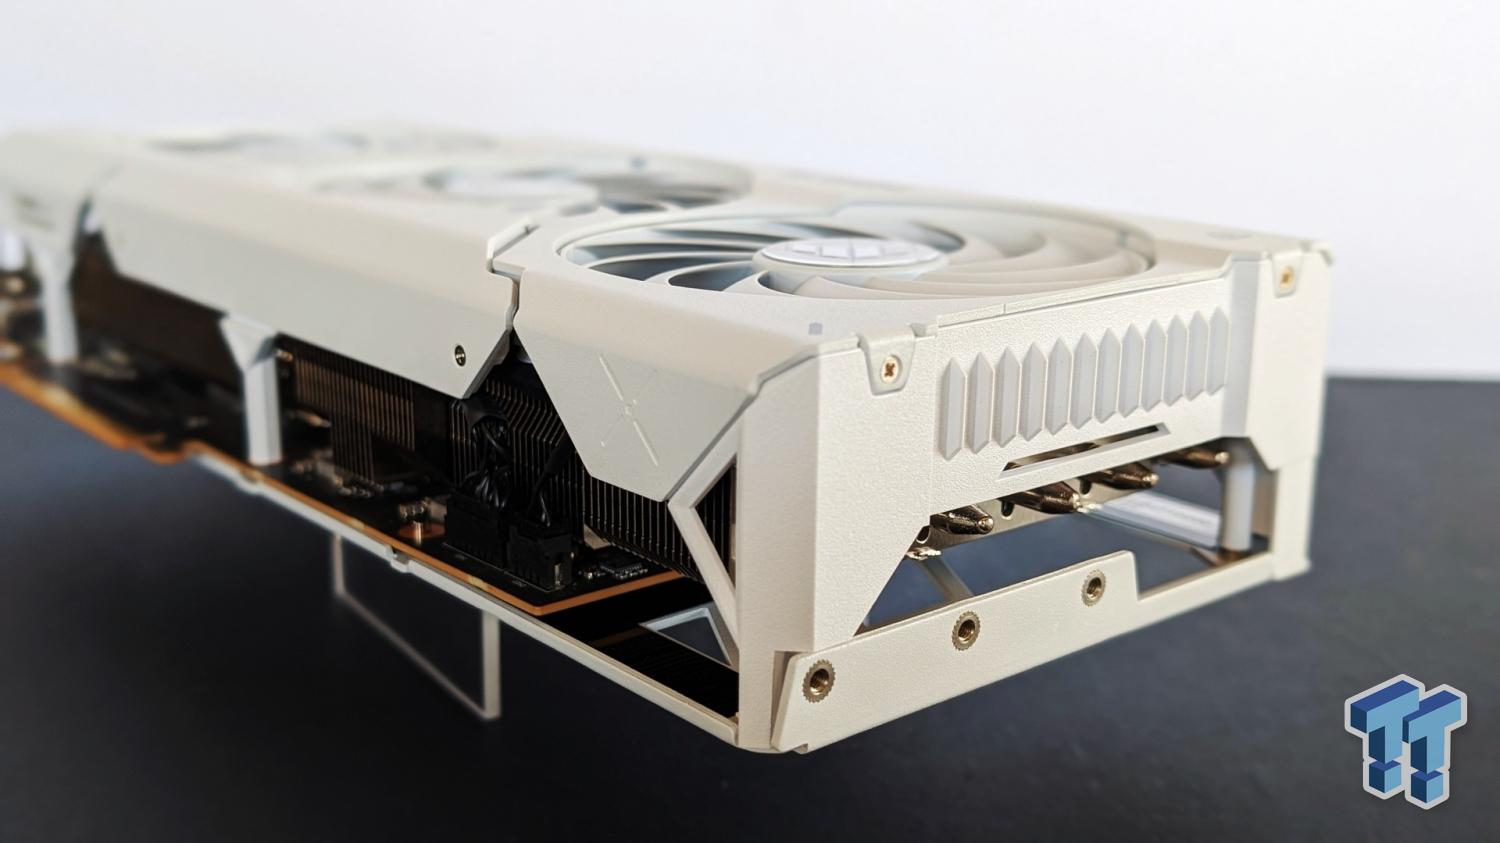 How Far Can You Push An RX 7800 XT? - PC Perspective